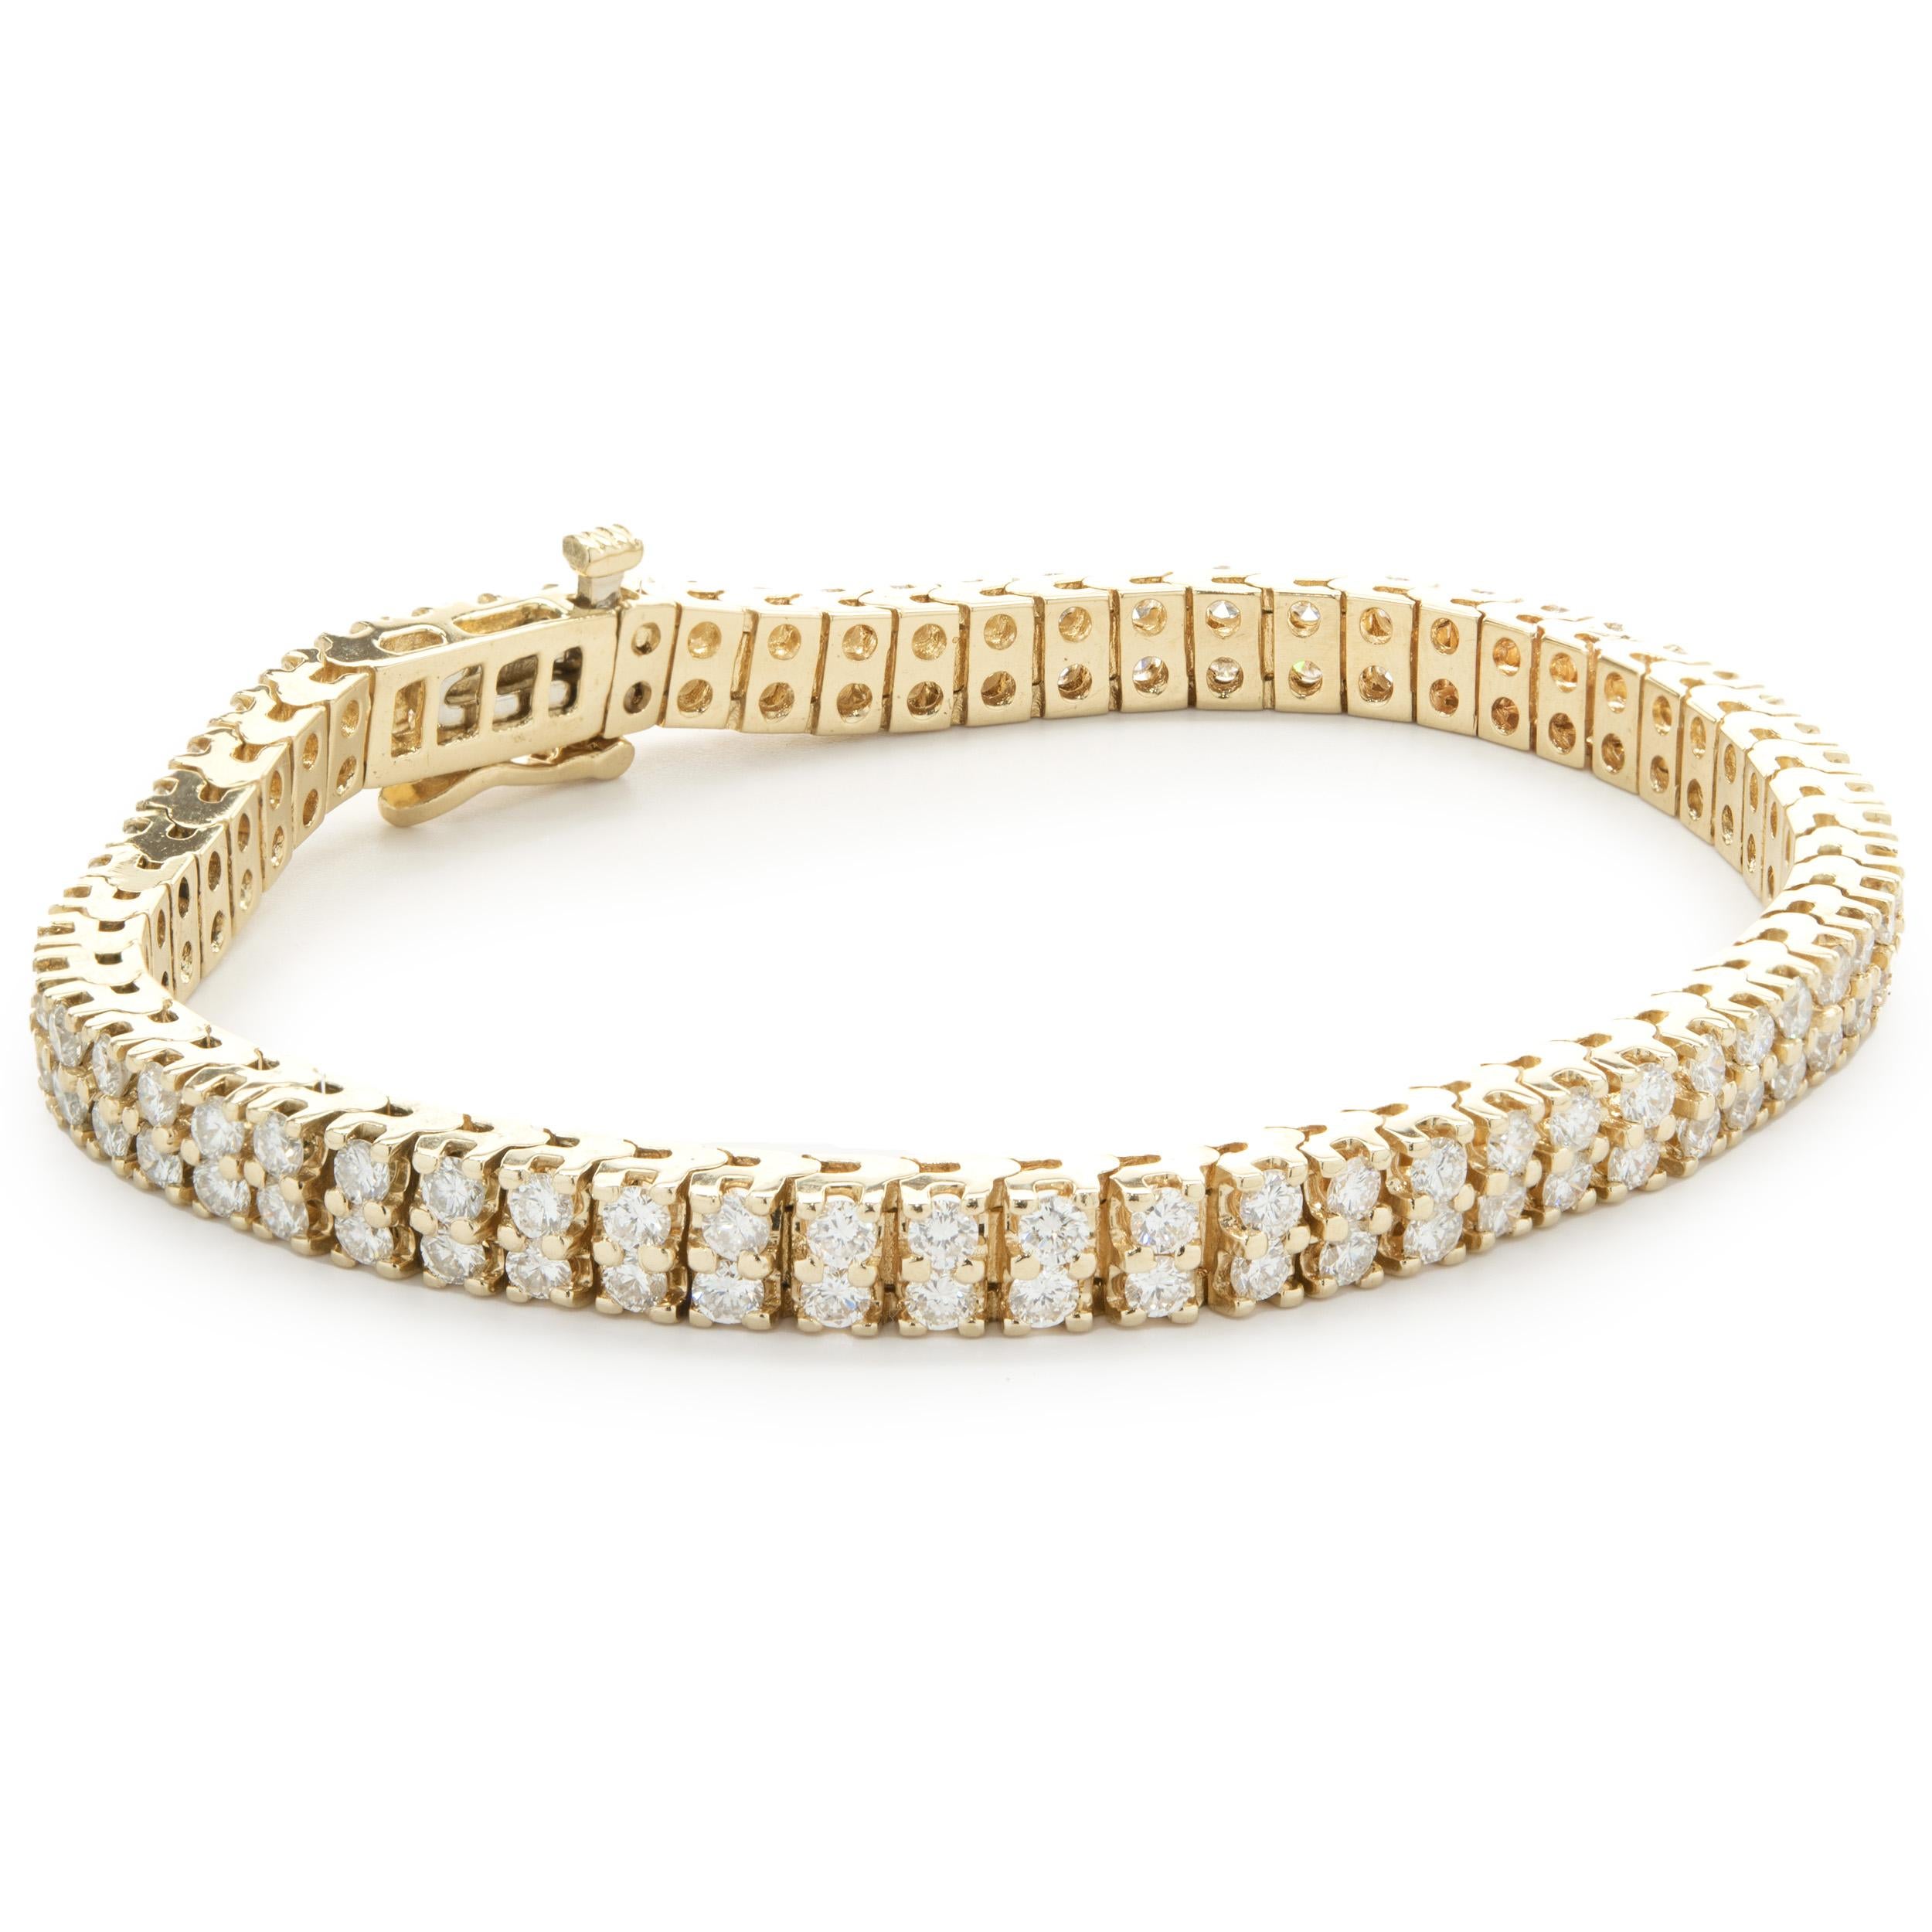 Designer: custom design
Material: 14K yellow gold
Diamonds: 222 round brilliant cut = 15.54cttw
Color: G 
Clarity: SI1
Dimensions: bracelet measures 7-inches in length 
Weight: 21.91 grams